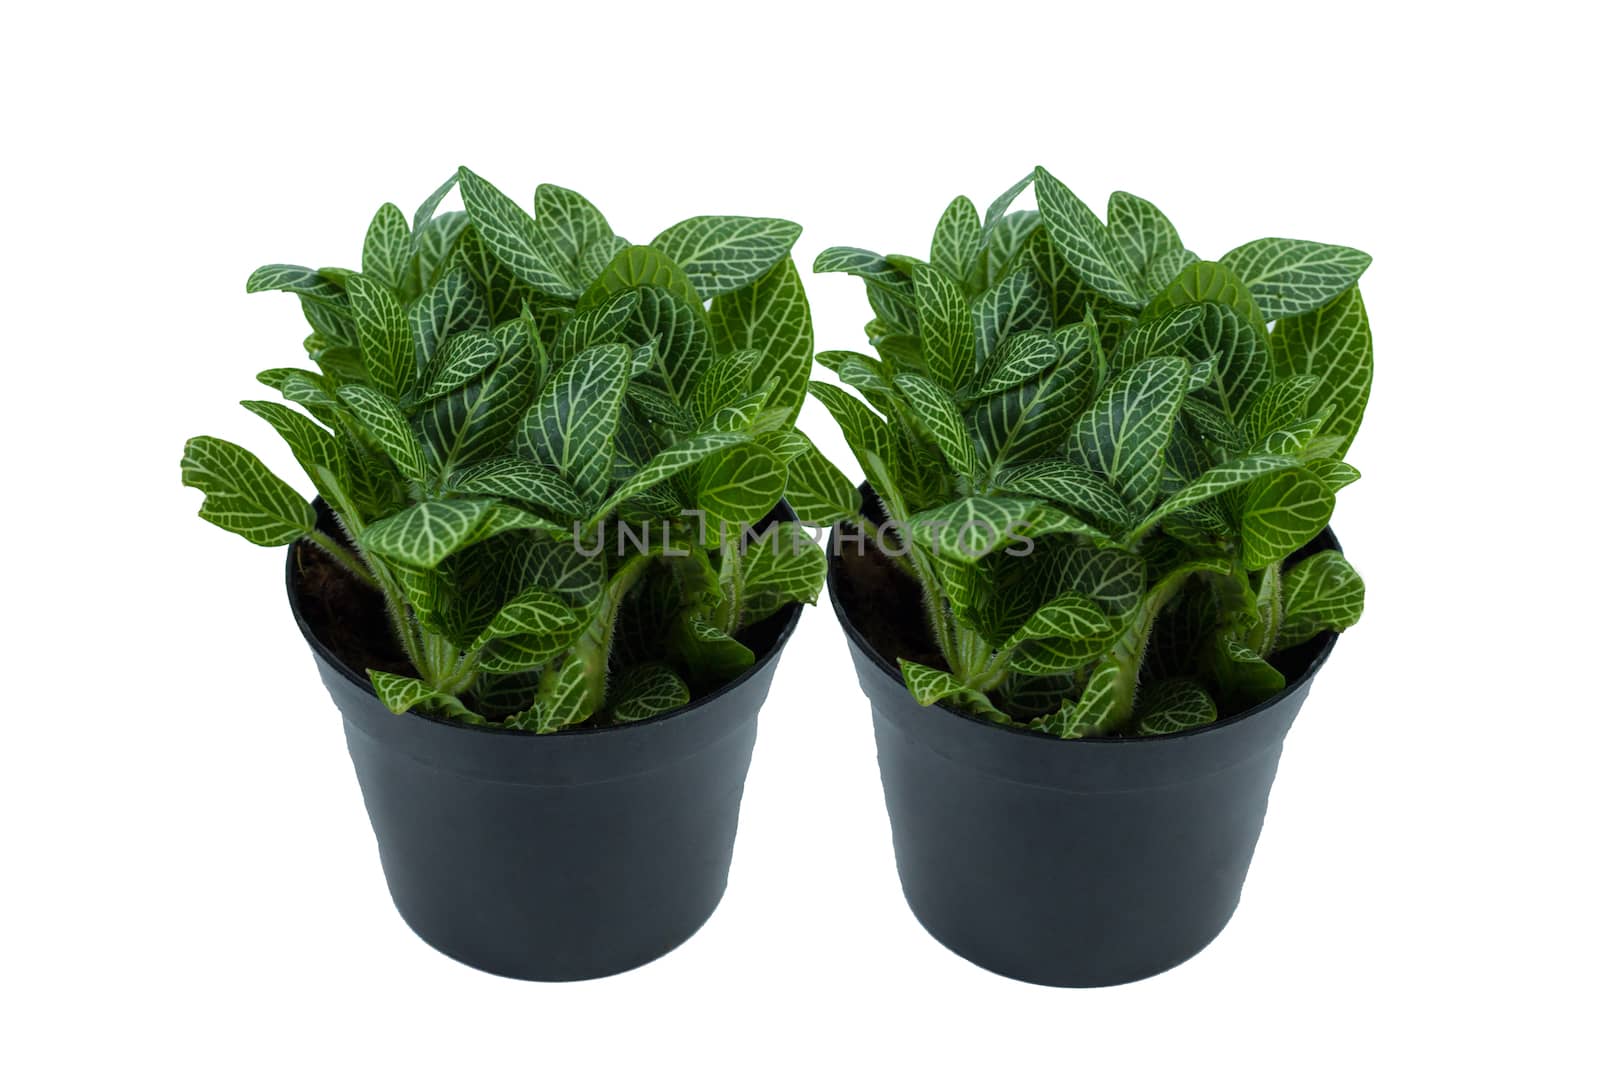 Little twin plant in a black pot on white background by nopparats